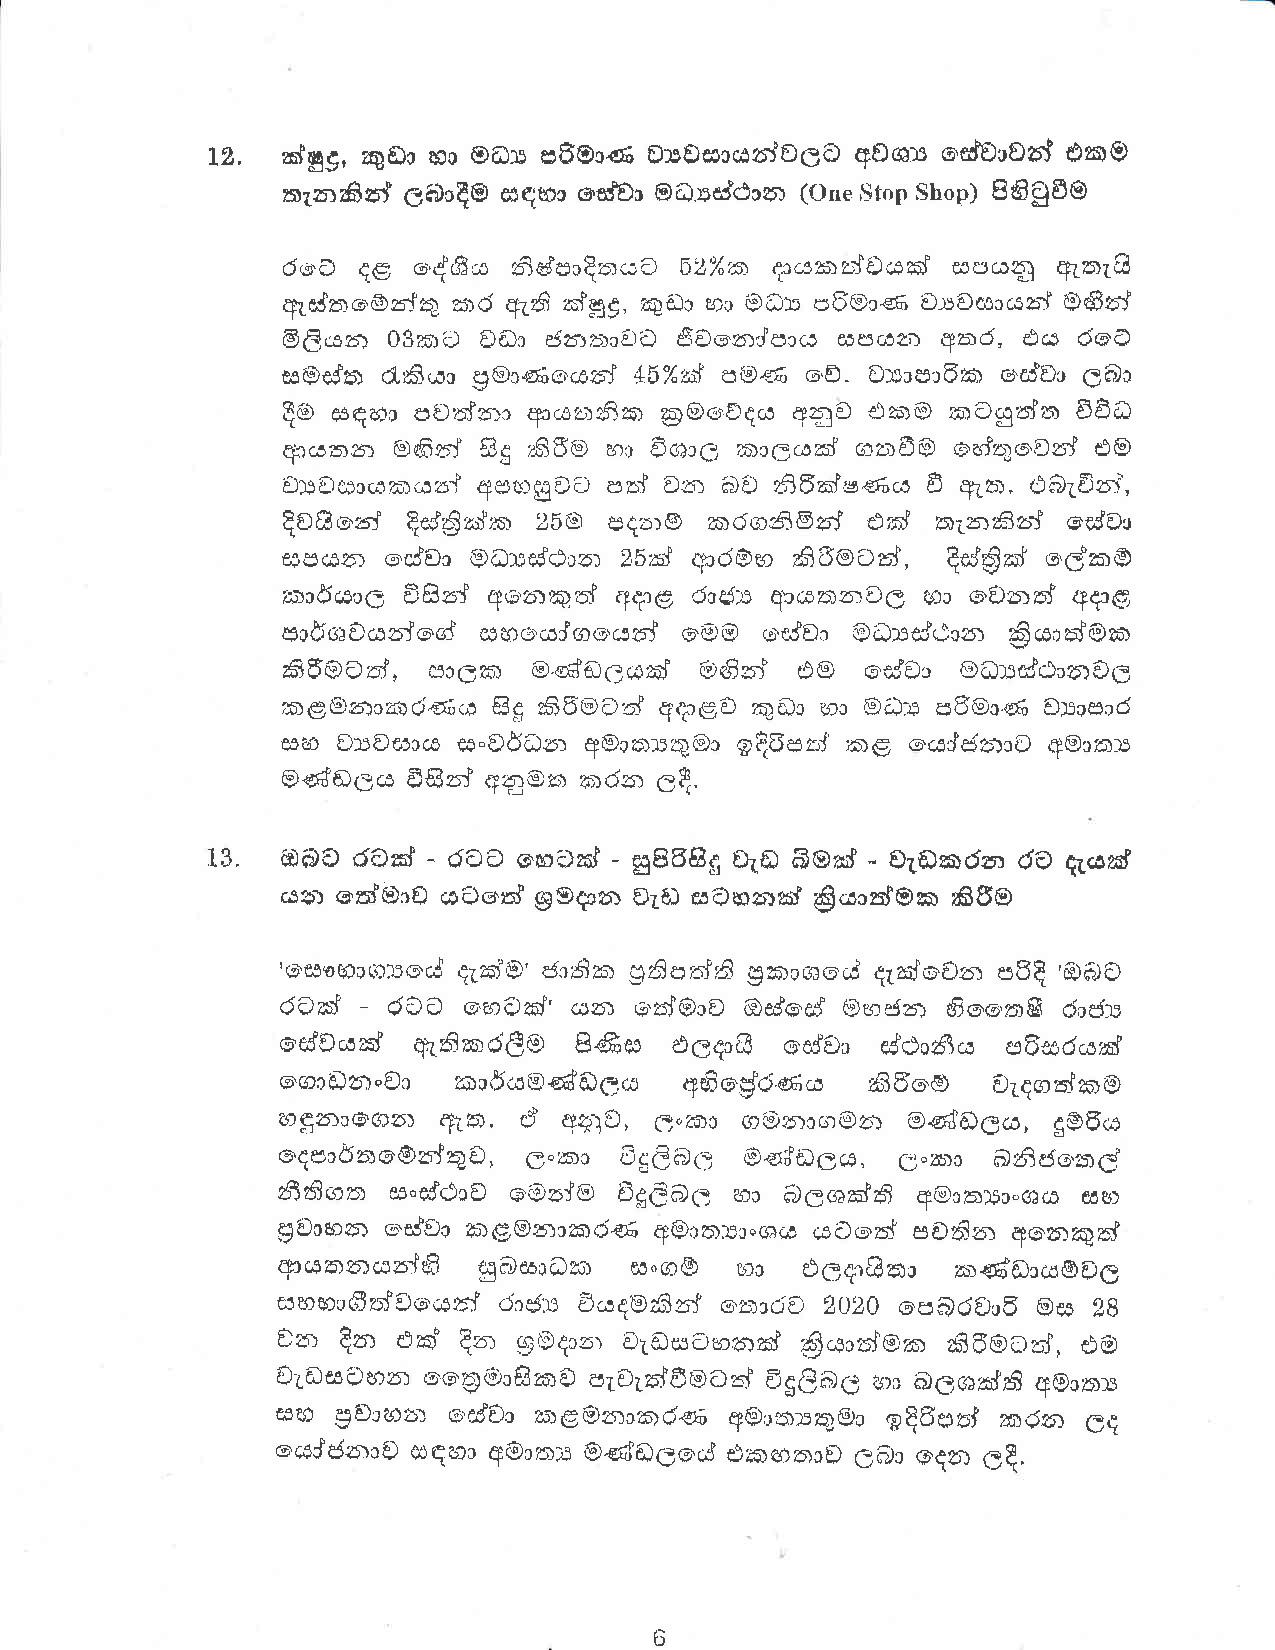 Cabinet Decision on 27.02.2020 page 006